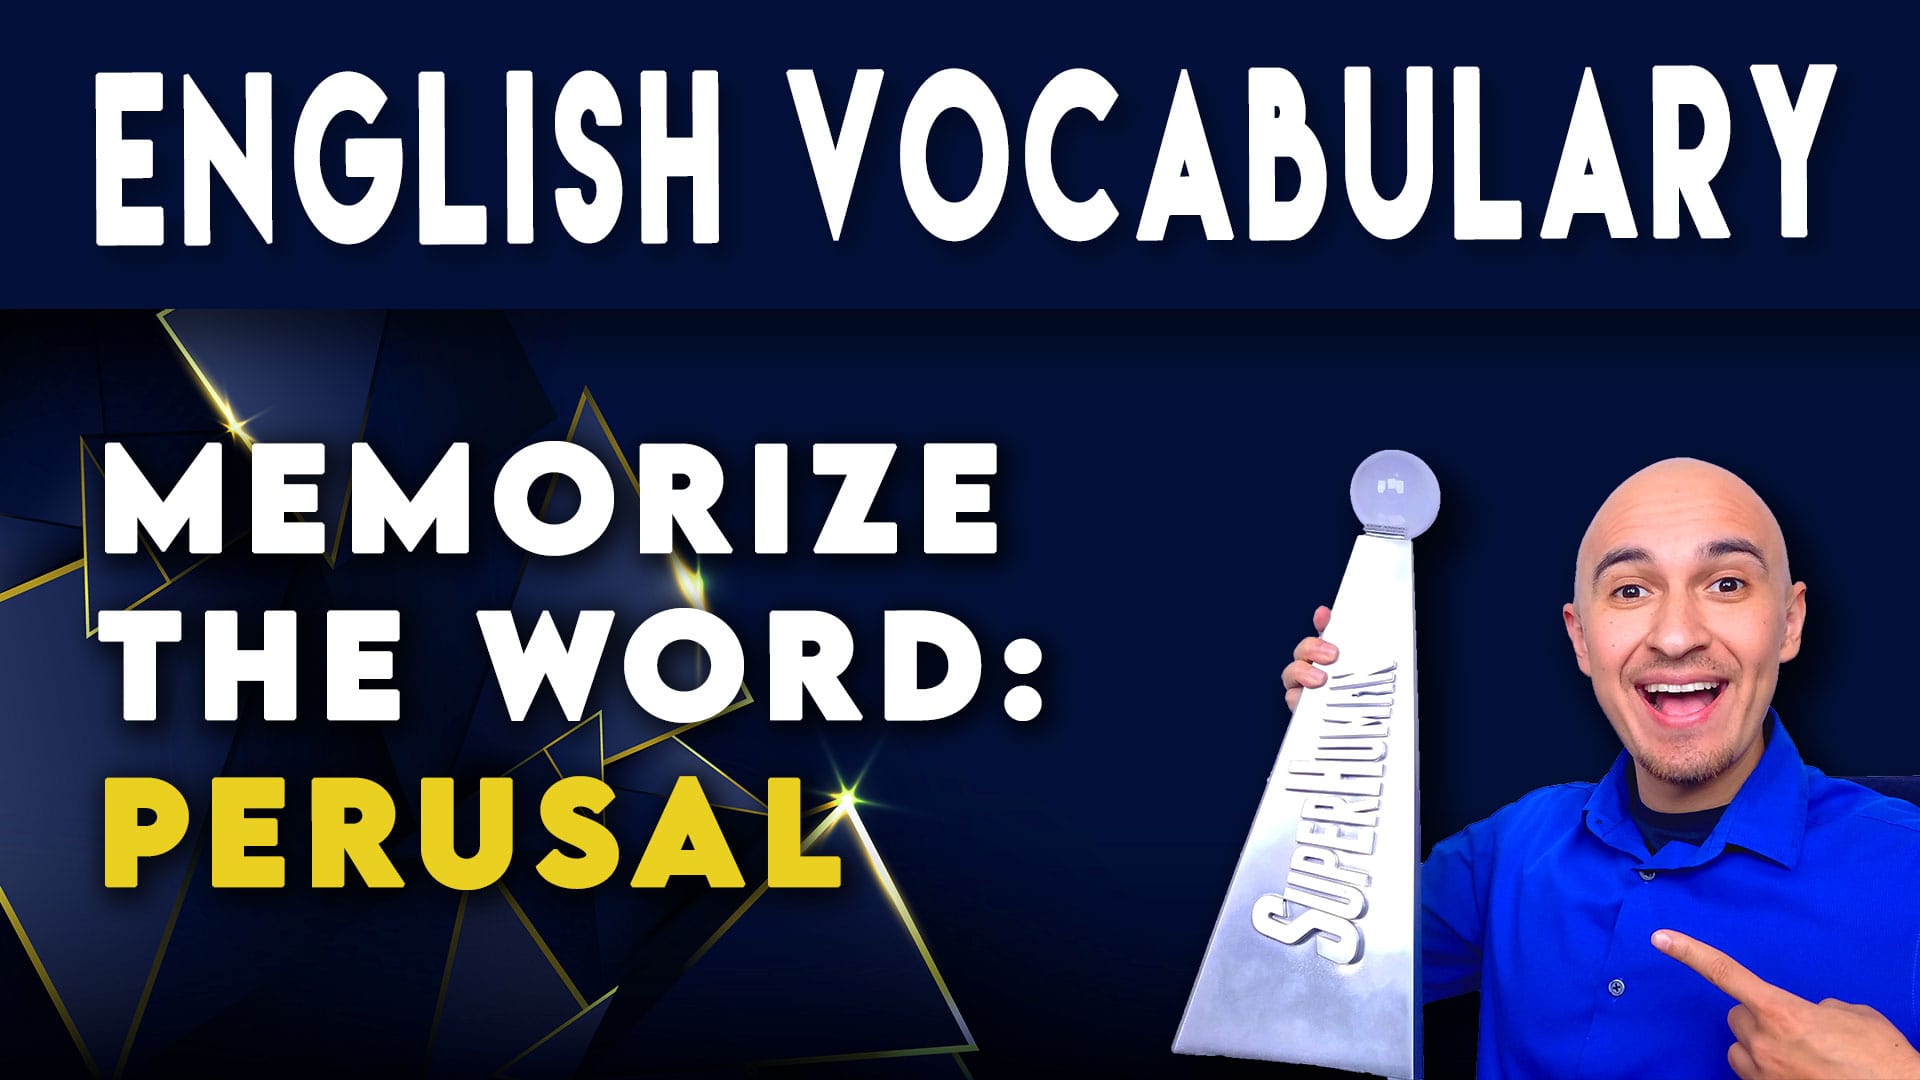 What Does PERUSAL Mean? Quickly Memorize Word Definition